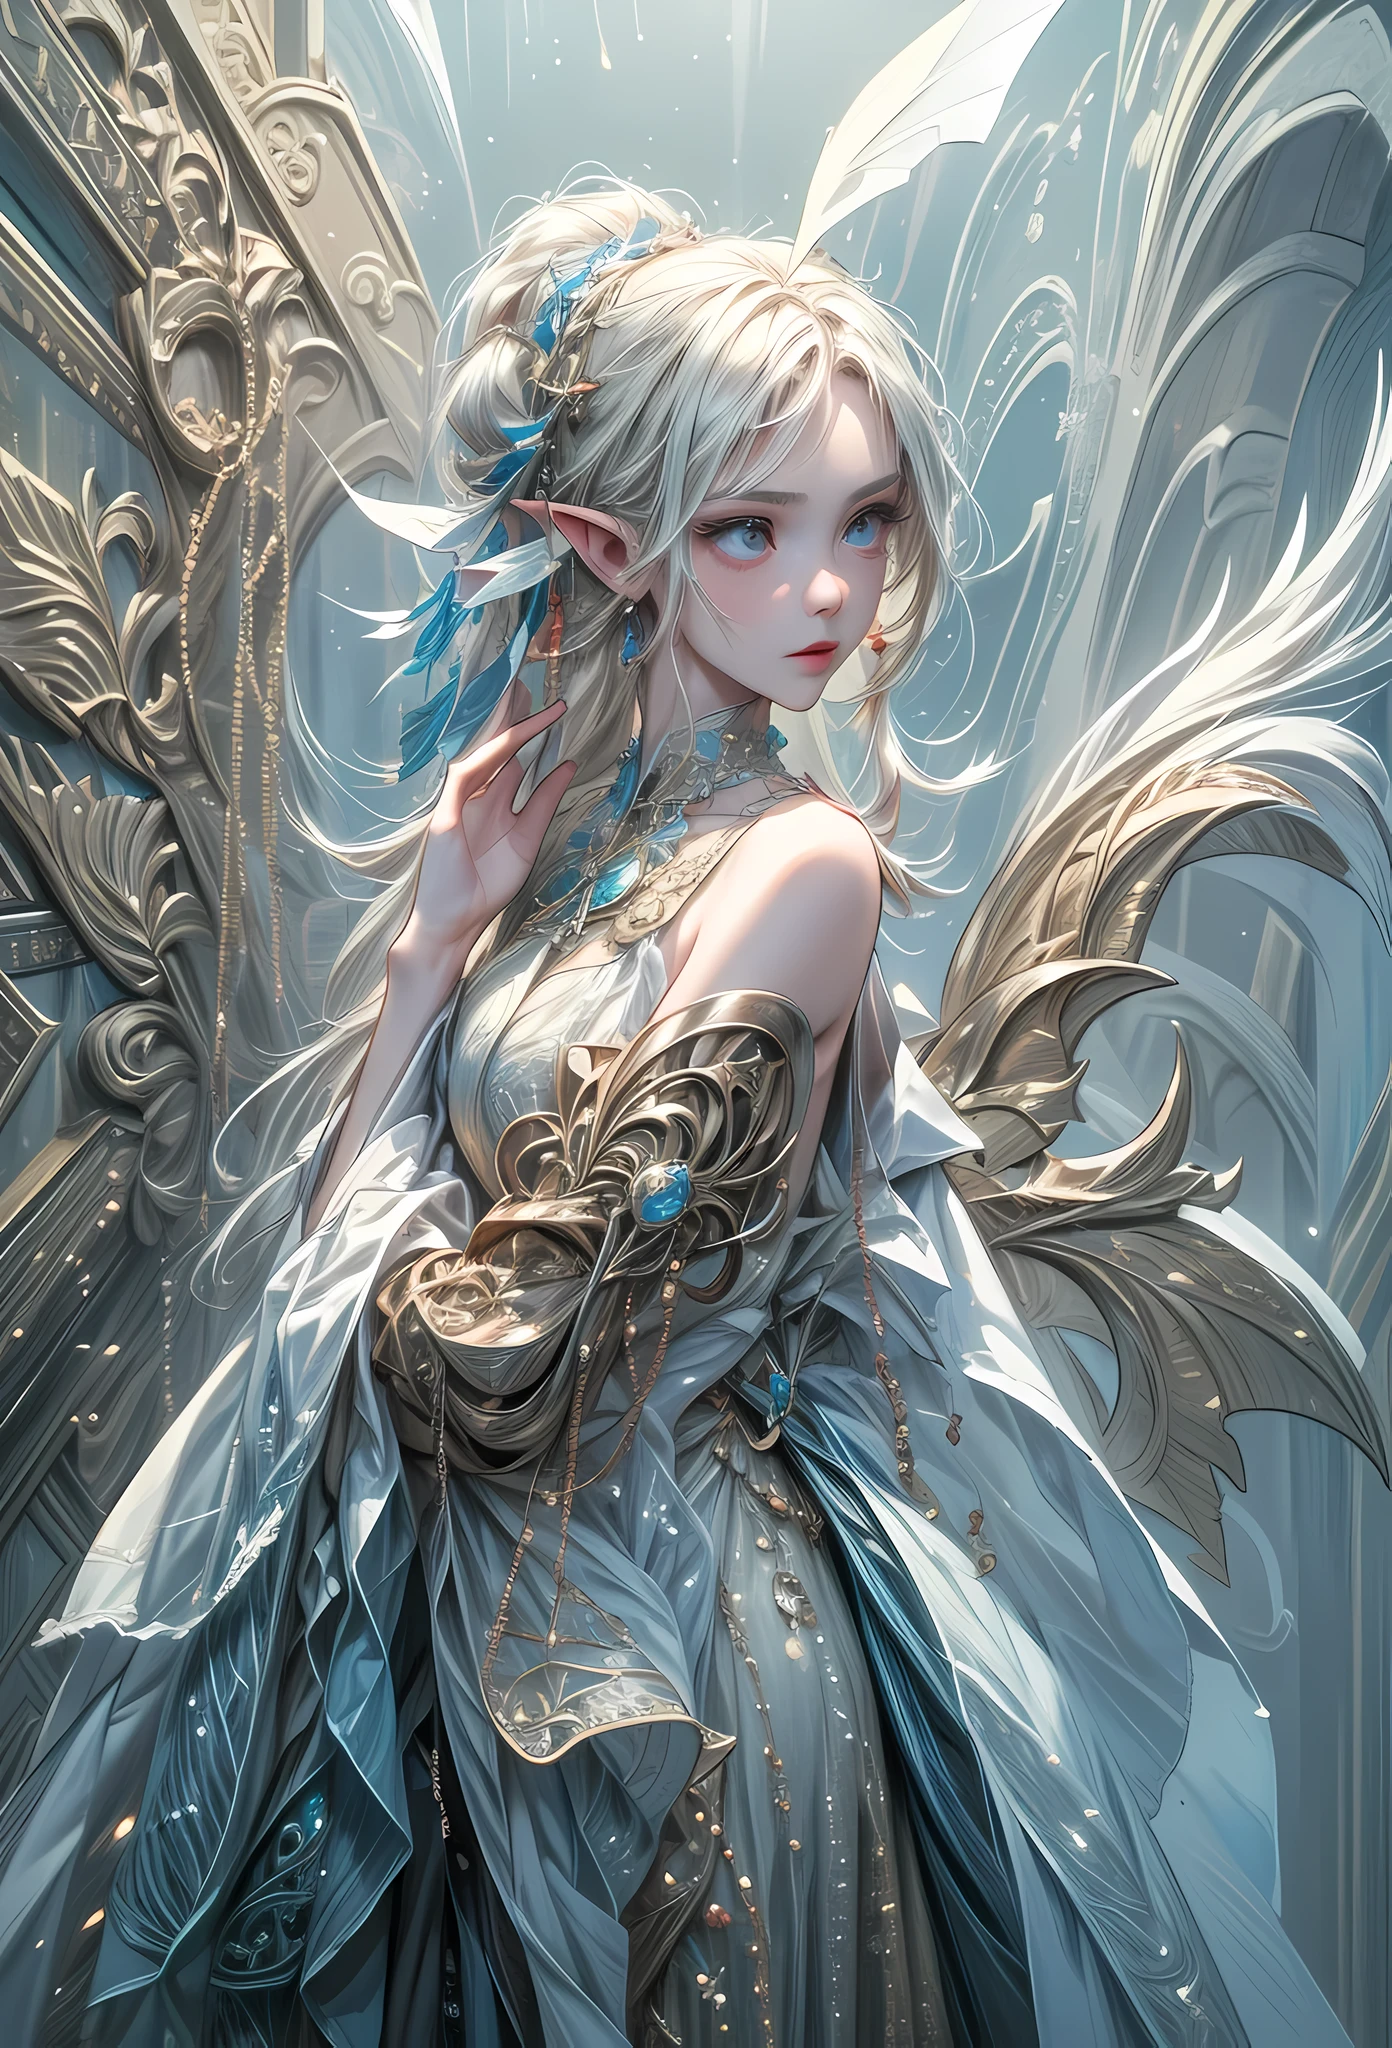 a picture of a female elf (intense details, Masterpiece, best quality: 1.5) fantasy swashbuckler, fantasy fencer, armed with a slim sword, shinning sword, metallic shine, colorful clothes, dynamic clothing, an ultra wide shot, full body (intense details, Masterpiece, best quality: 1.5)epic beautiful female elf (intense details, Masterpiece, best quality: 1.5), rich hair, braided hair, small pointed ears, Sword and shield, GLOWING SWORD [colorful magical sigils in the air],[ colorful arcane markings floating] (intricate details, Masterpiece, best quality: 1.6), holding a [sword] (intricate details, Masterpiece, best quality: 1.6) holding a [sword glowing in red light] fantasy urban street (intense details, Masterpiece, best quality: 1.5),  purple cloak, long cloak (intense details, Masterpiece, best quality: 1.5), sense of daring, sense of adventure,  high details, best quality, 8k, [ultra detailed], masterpiece, best quality, (extremely detailed), dynamic angle, ultra wide shot, photorealistic, RAW, fantasy art, dnd art, fantasy art, realistic art, DonM3lv3s, fantasysword sword, detailed face
d